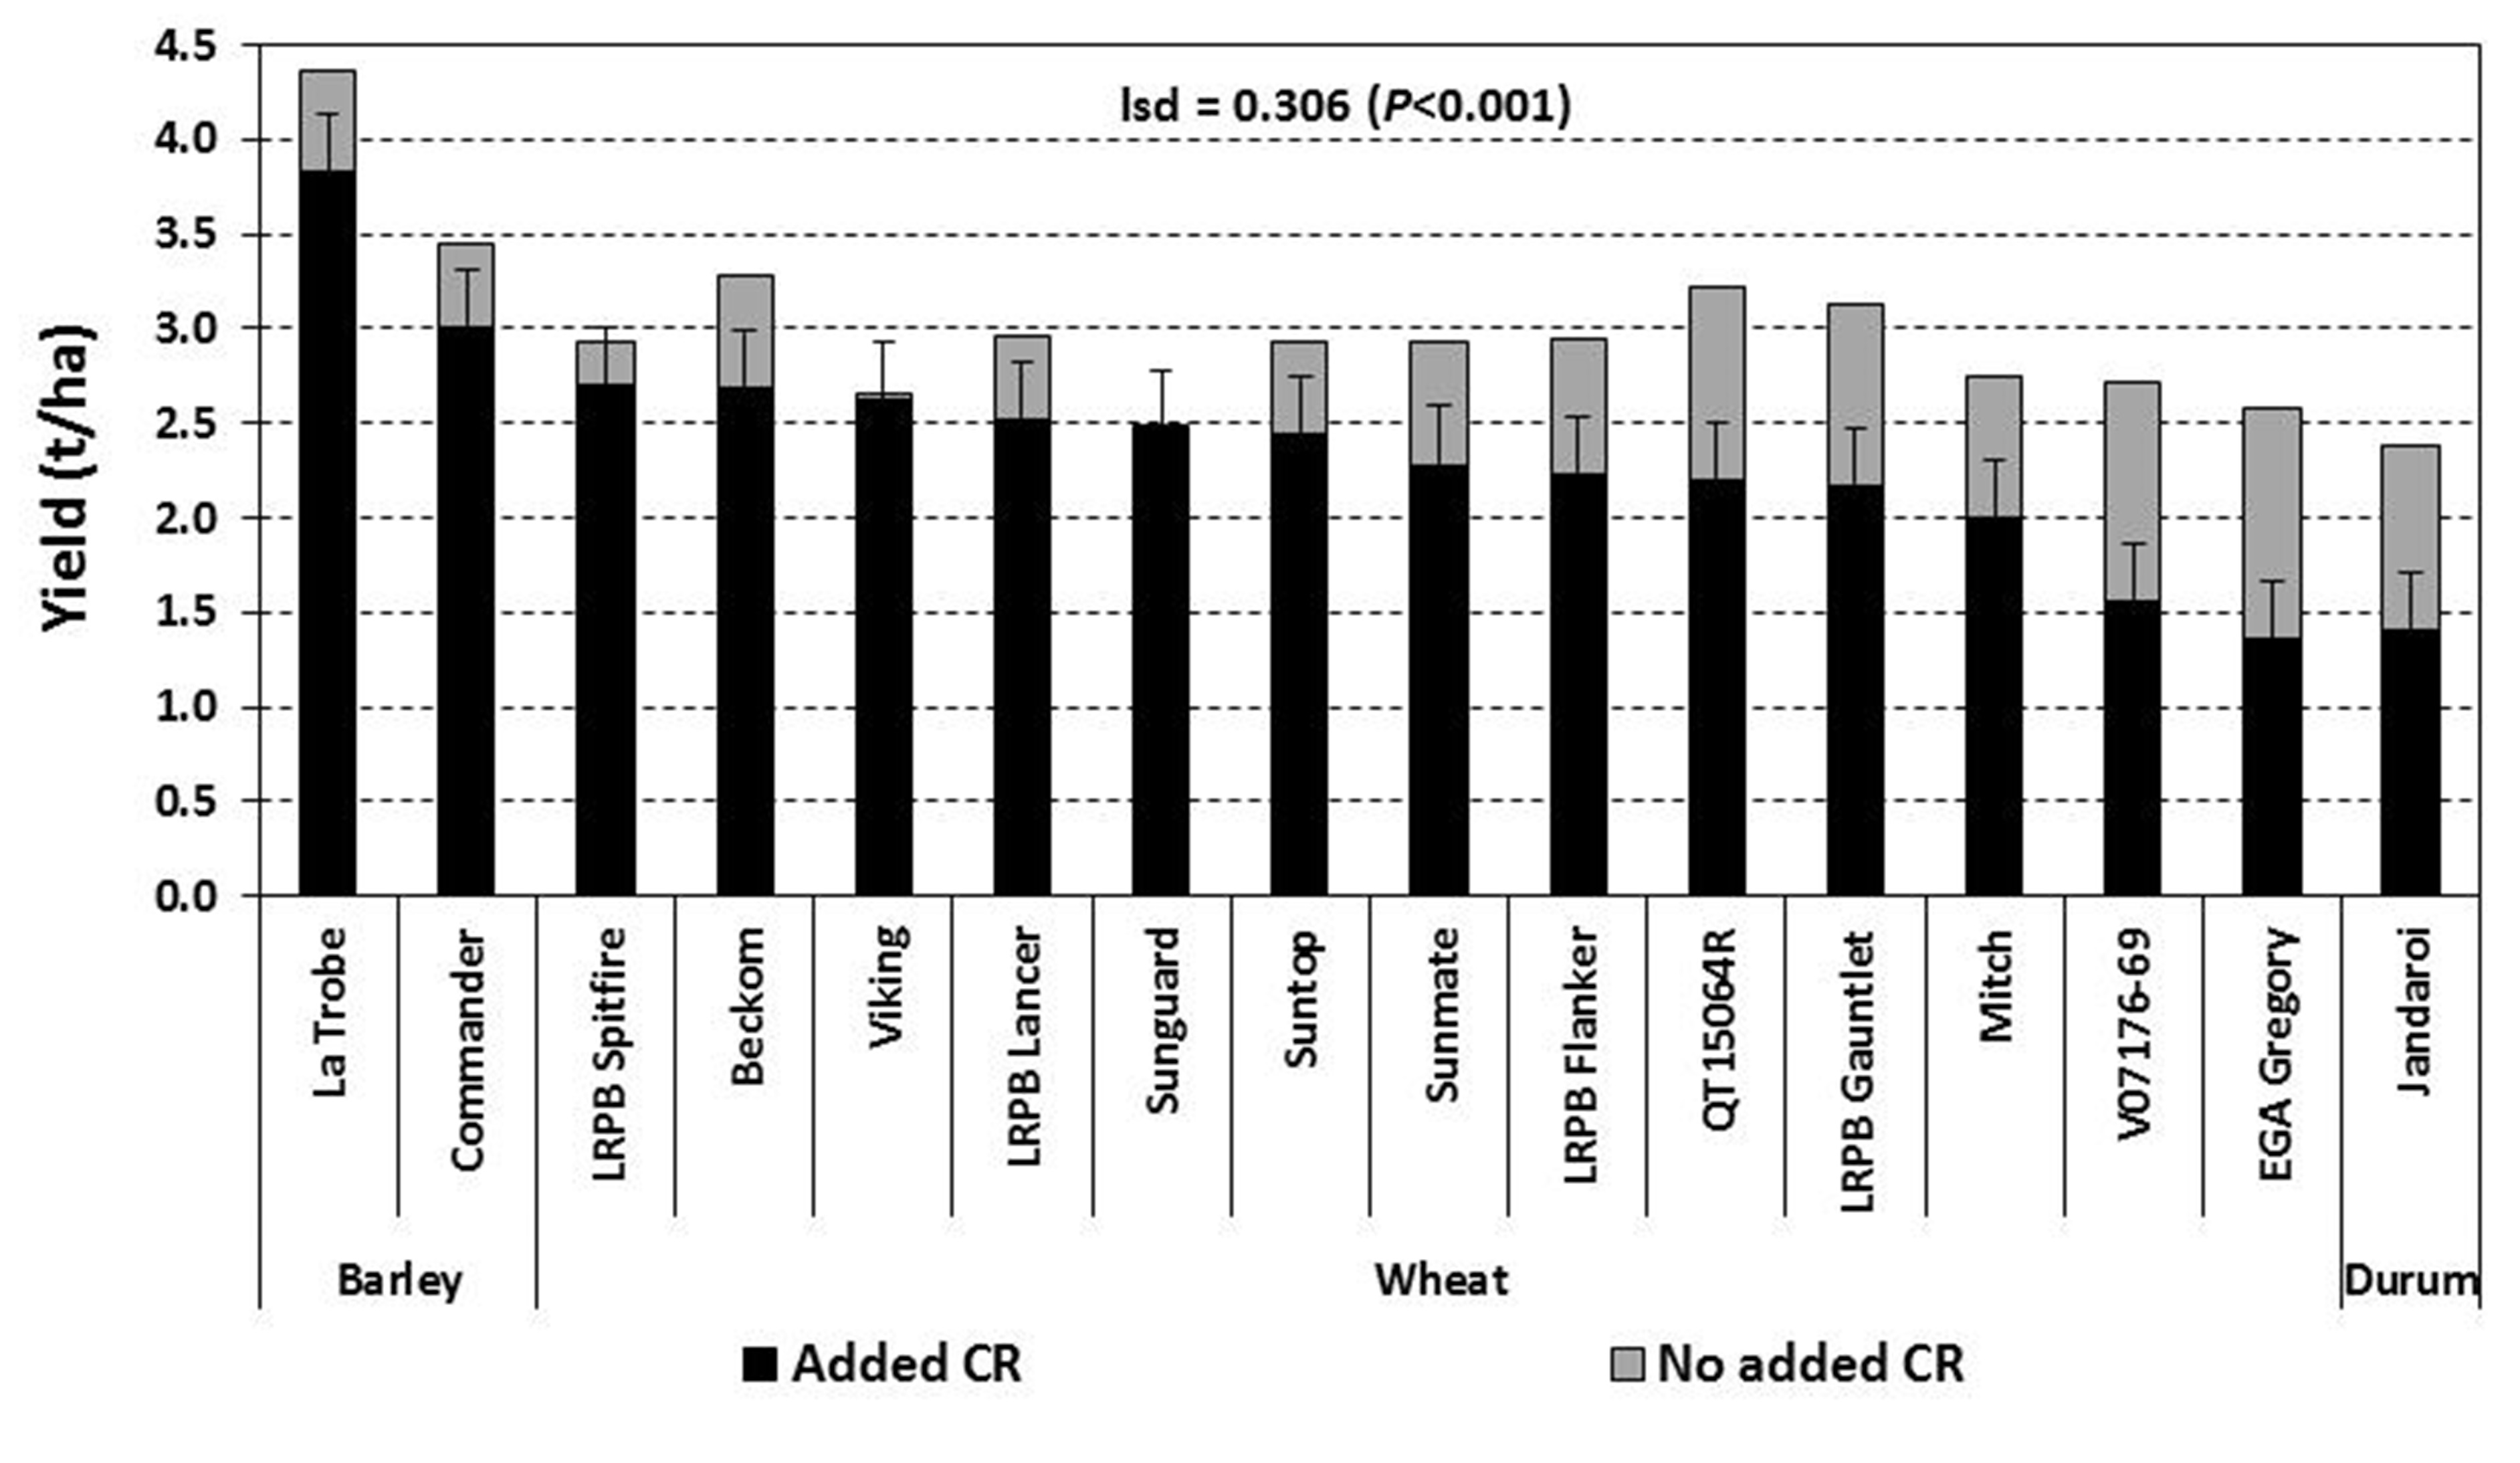 Figure 1. Impact of crown rot on the yield of two barley, 13 bread wheat and one durum entry - Nyngan 2015